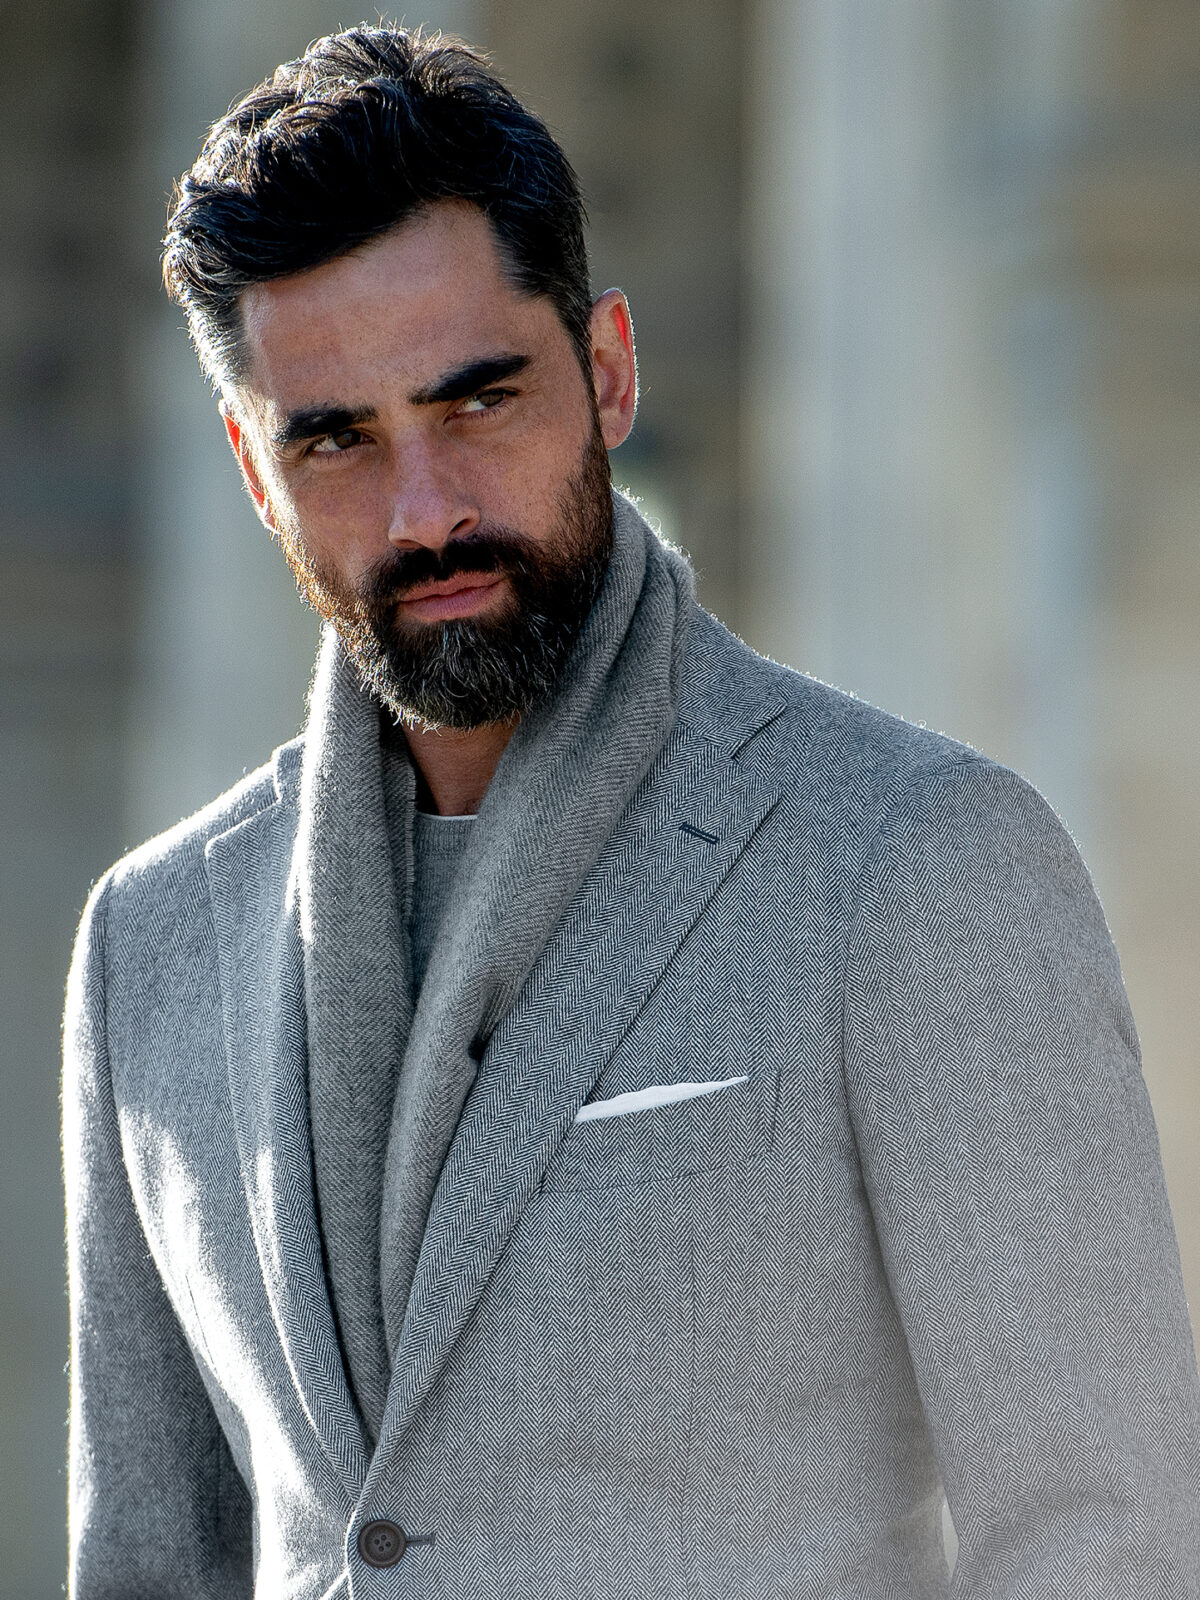 Fashionable Male Model Wearing Grey Suit Scarf And Hat Stock Photo -  Download Image Now - iStock